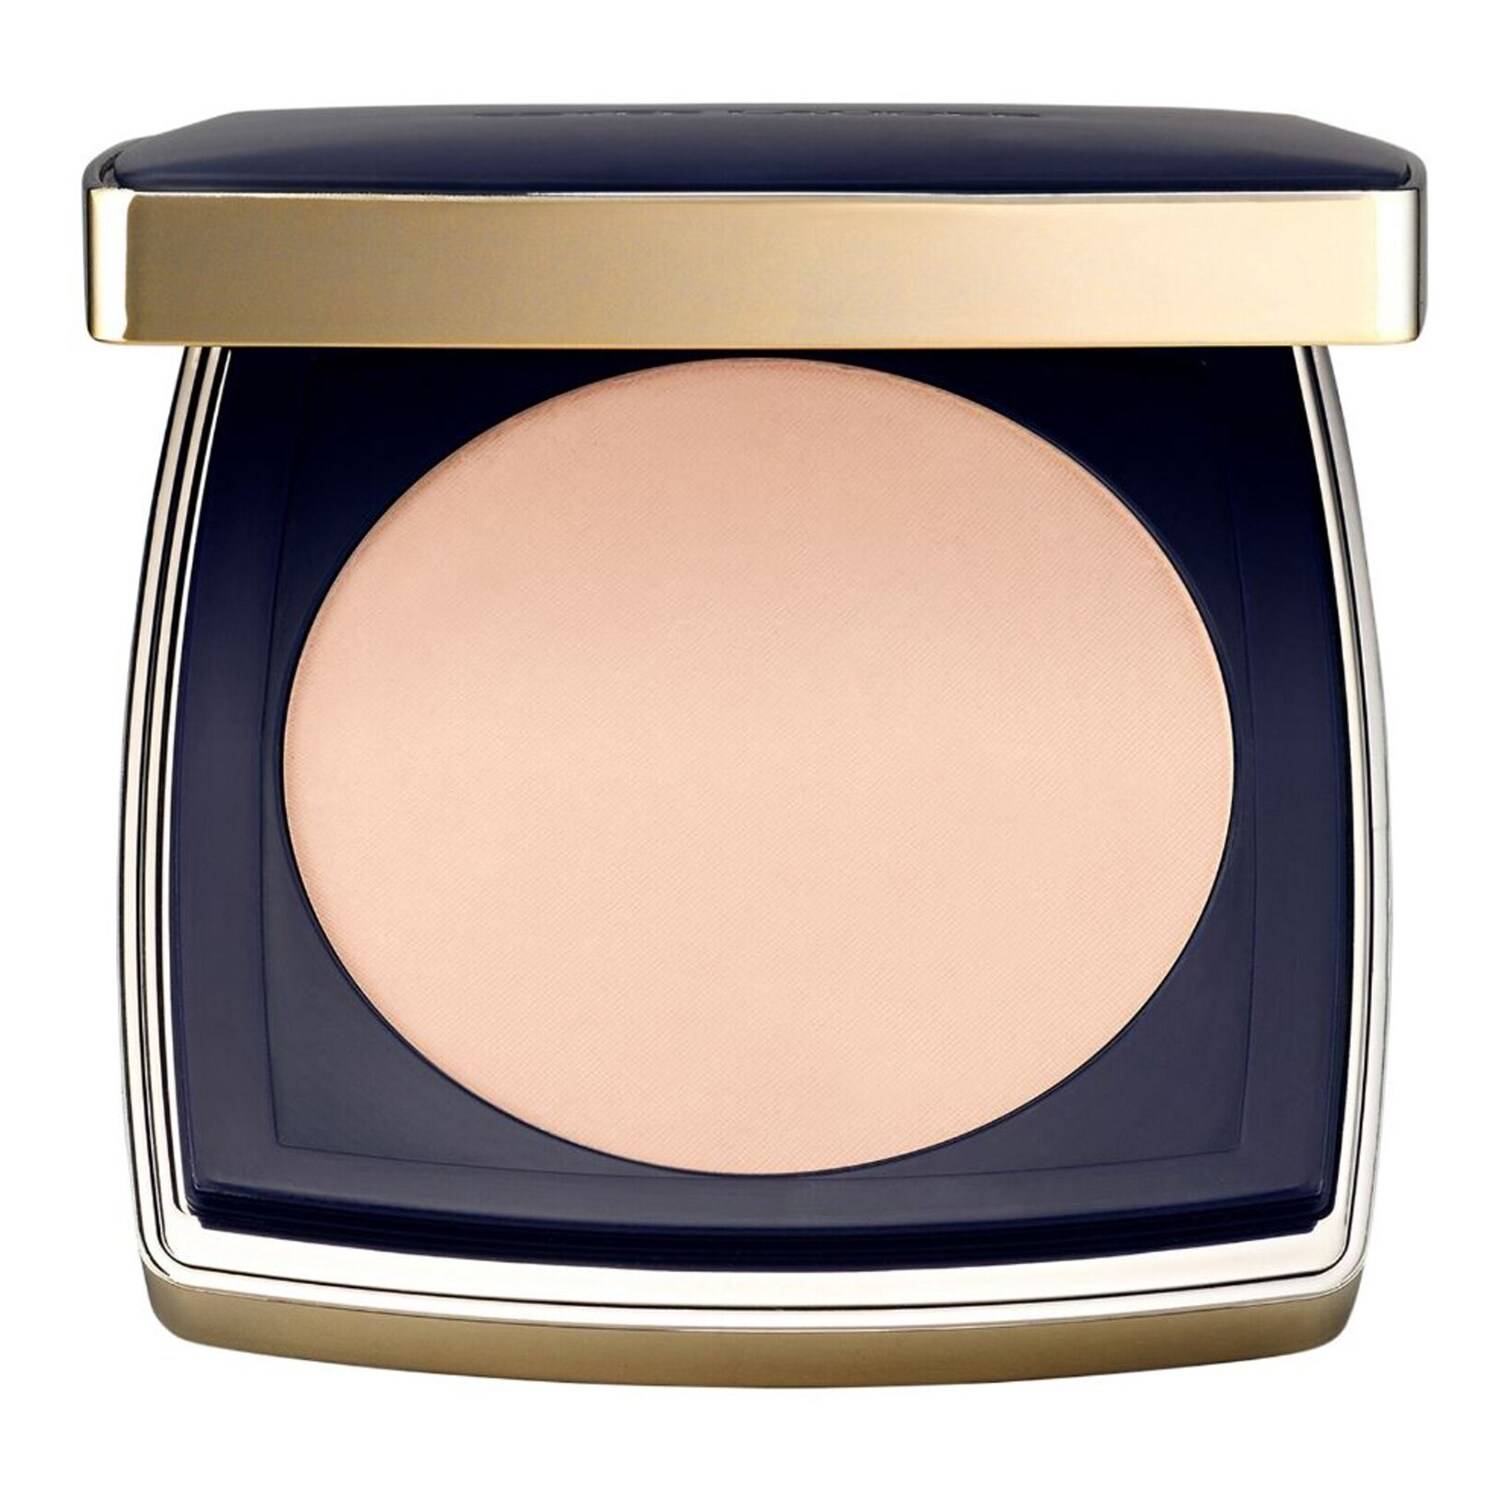 Estee Lauder Double Wear Stay-In-Place Matte Powder Foundation Spf10 12G 1C0 Shell